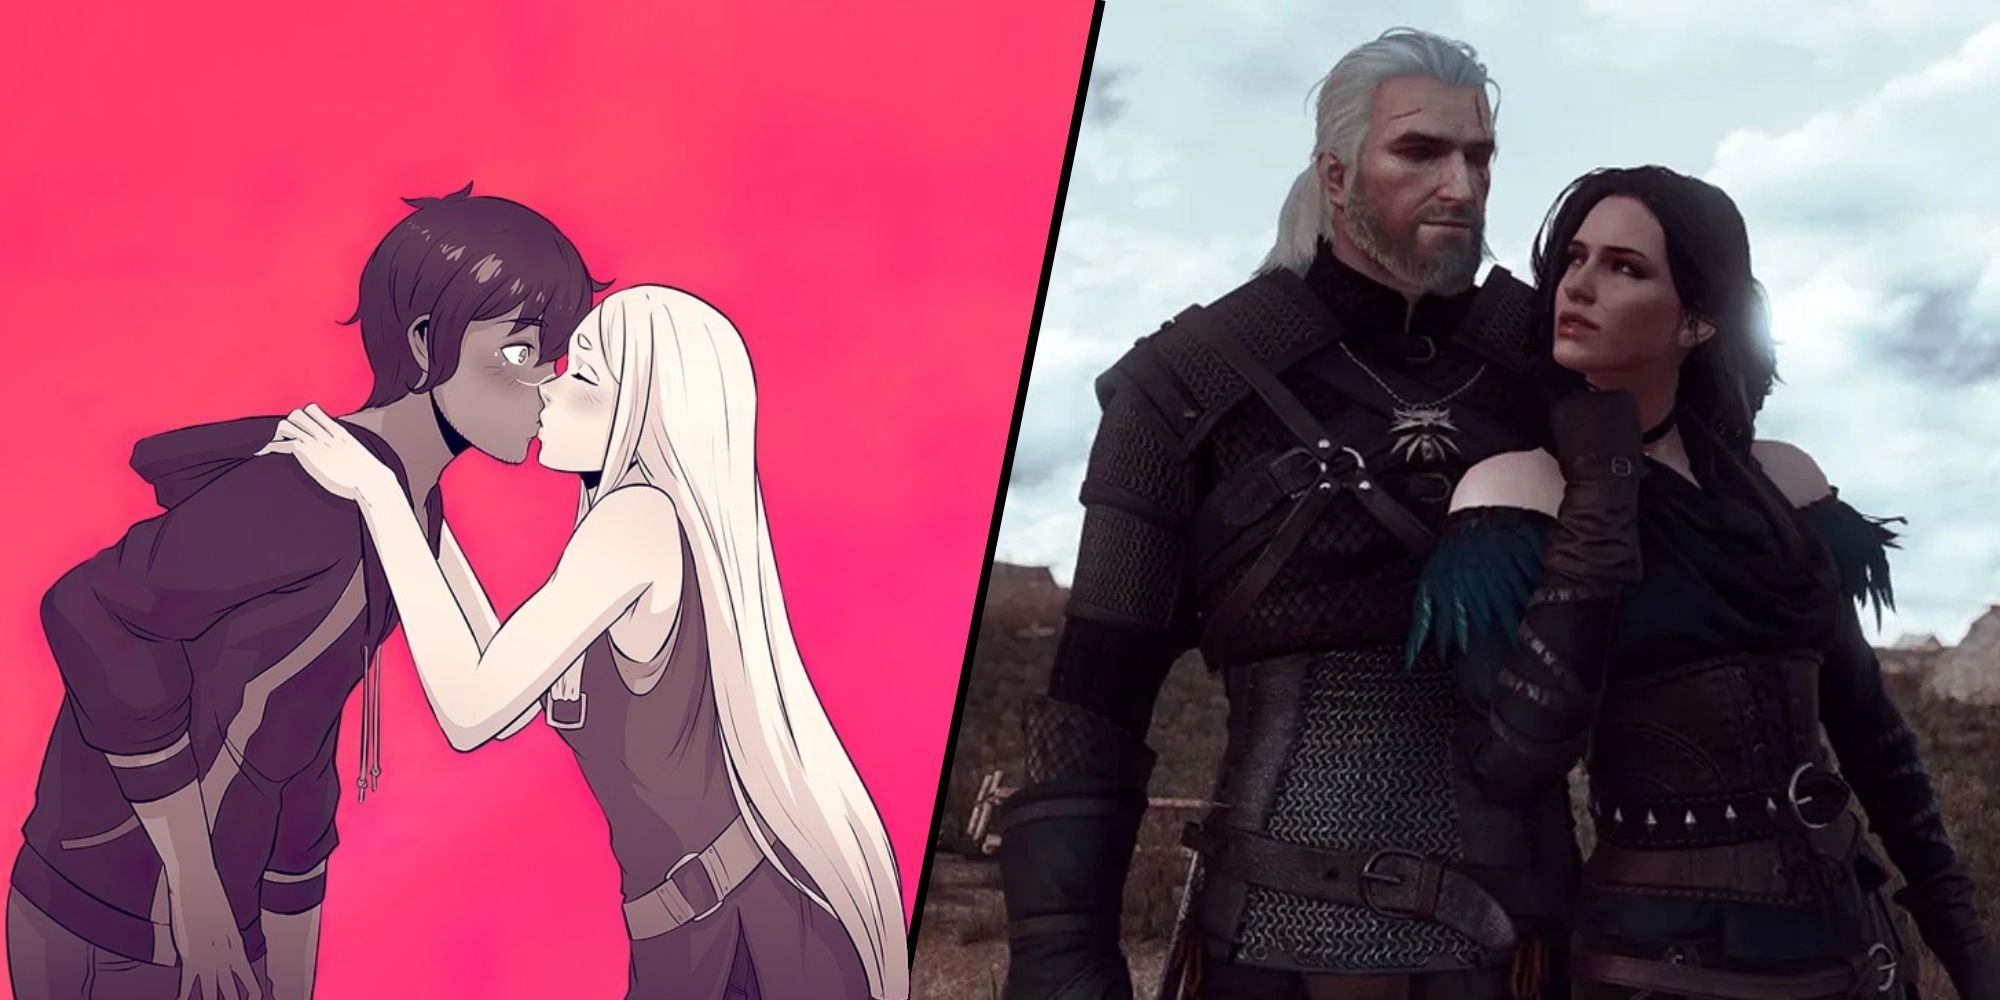 RPG Couples Featured Image (with official art taken from Have showing Kay and Yu kissing, as well as an image take from The Witcher 3 showing Geralt and Yennefer being cozy togerher)